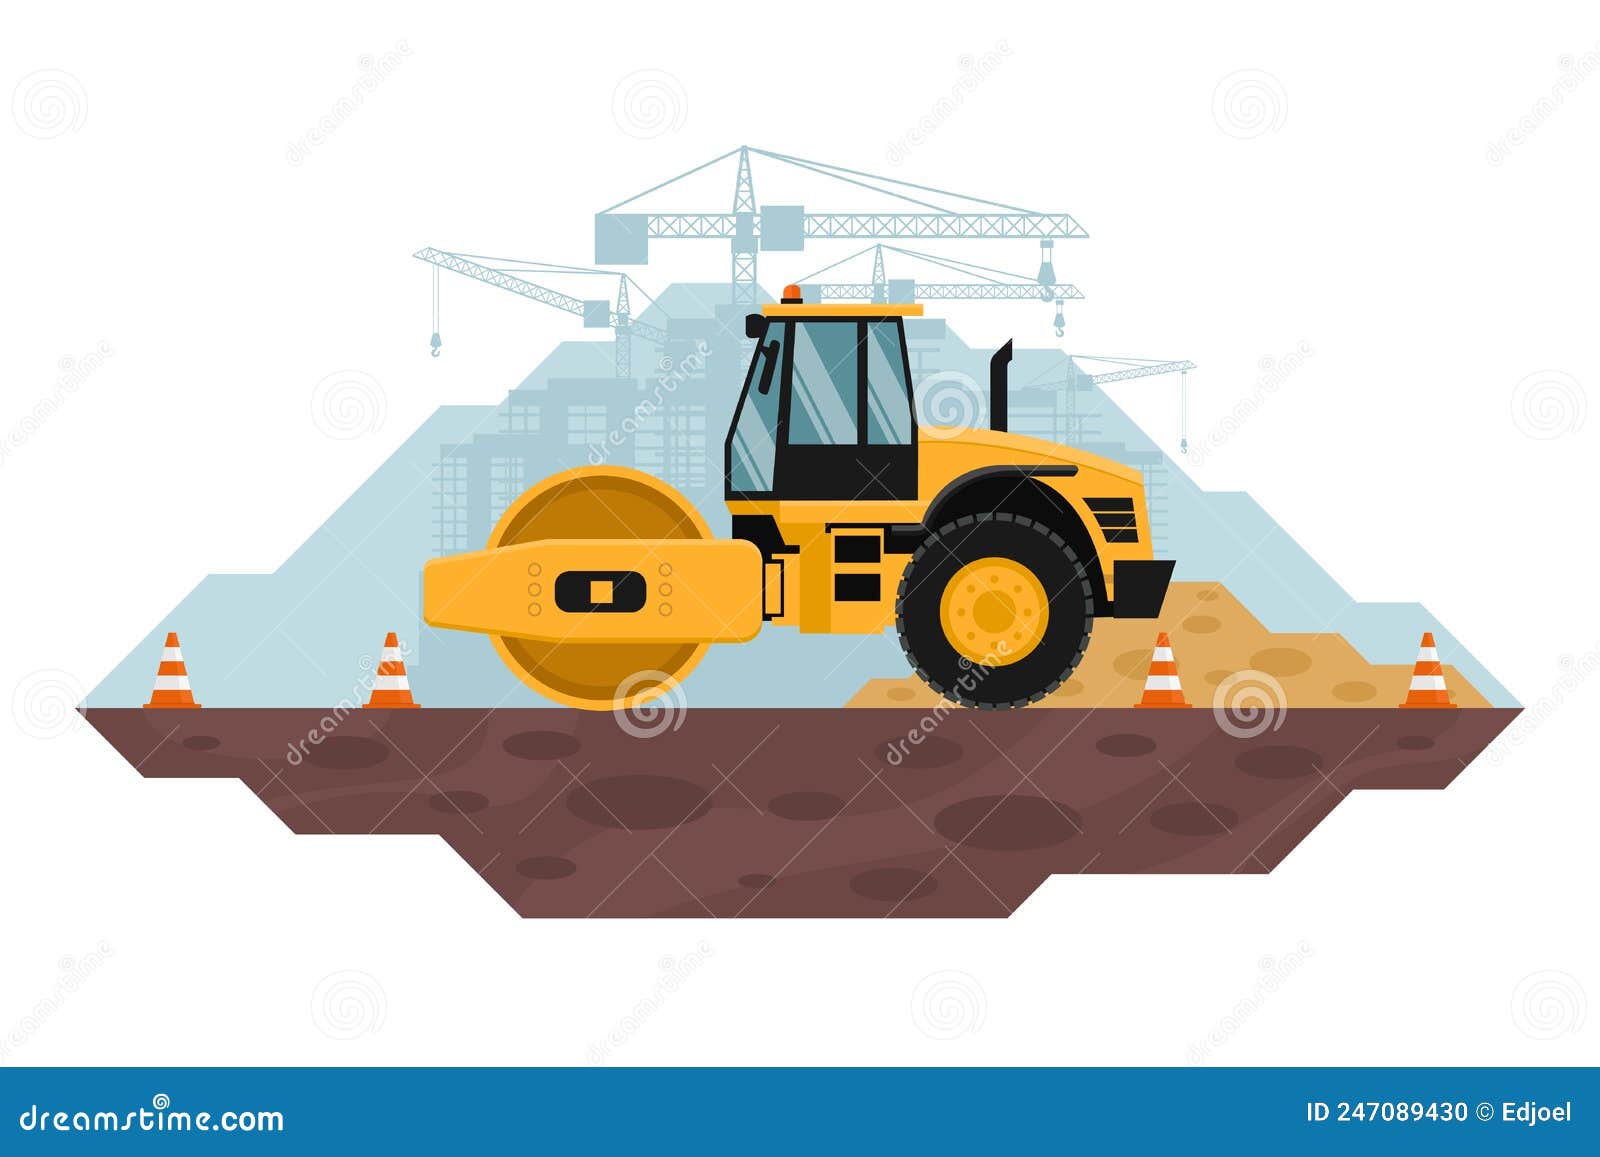 soil compactor performing work of leveling and compaction of land, heavy machinery used in the construction and mining industry. s